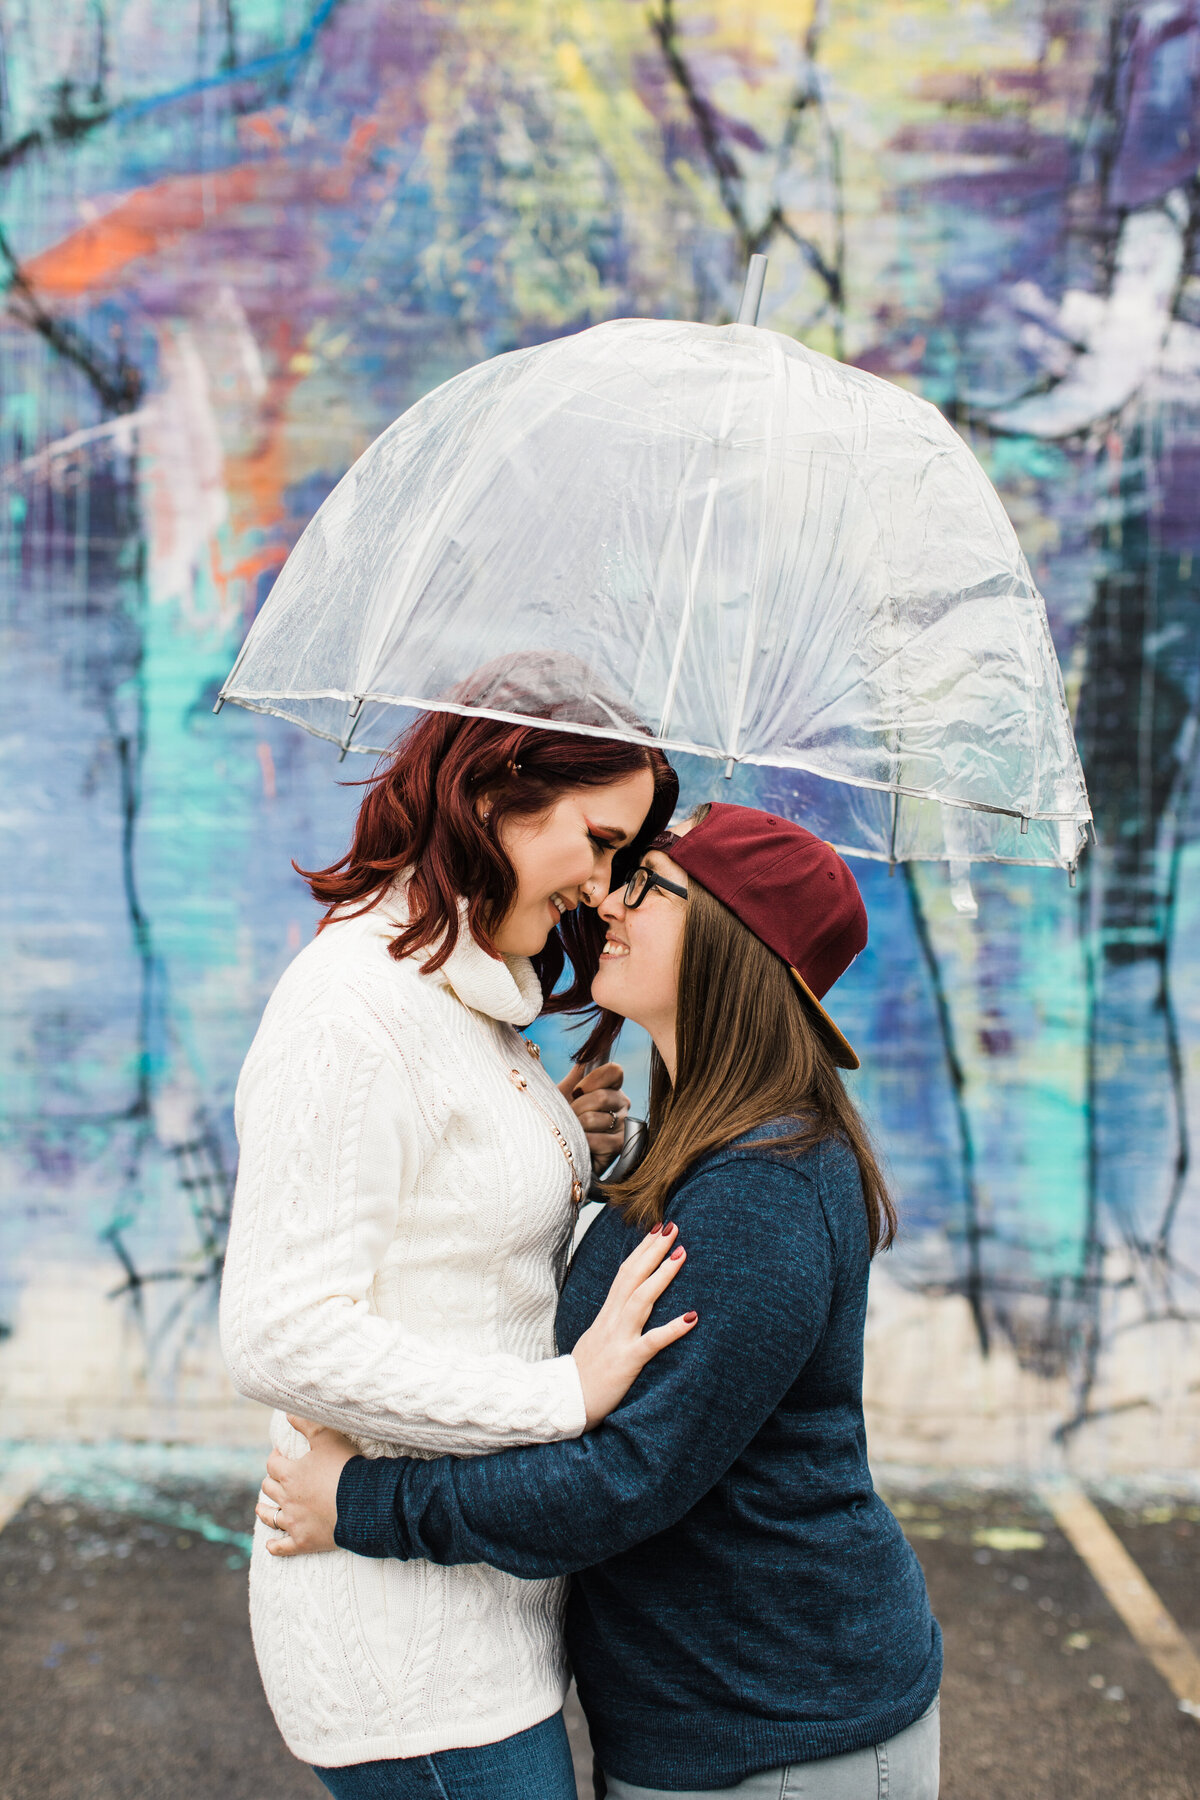 A lesbian couple holding each other close under an umbrella and in front of a colorful mural during their engagement session in Deep Ellum in Dallas, Texas. The woman on the right is wearing a dark blue sweater, glasses, and a backwards red baseball cap. The woman on the right is wearing a detailed white sweater and jeans.